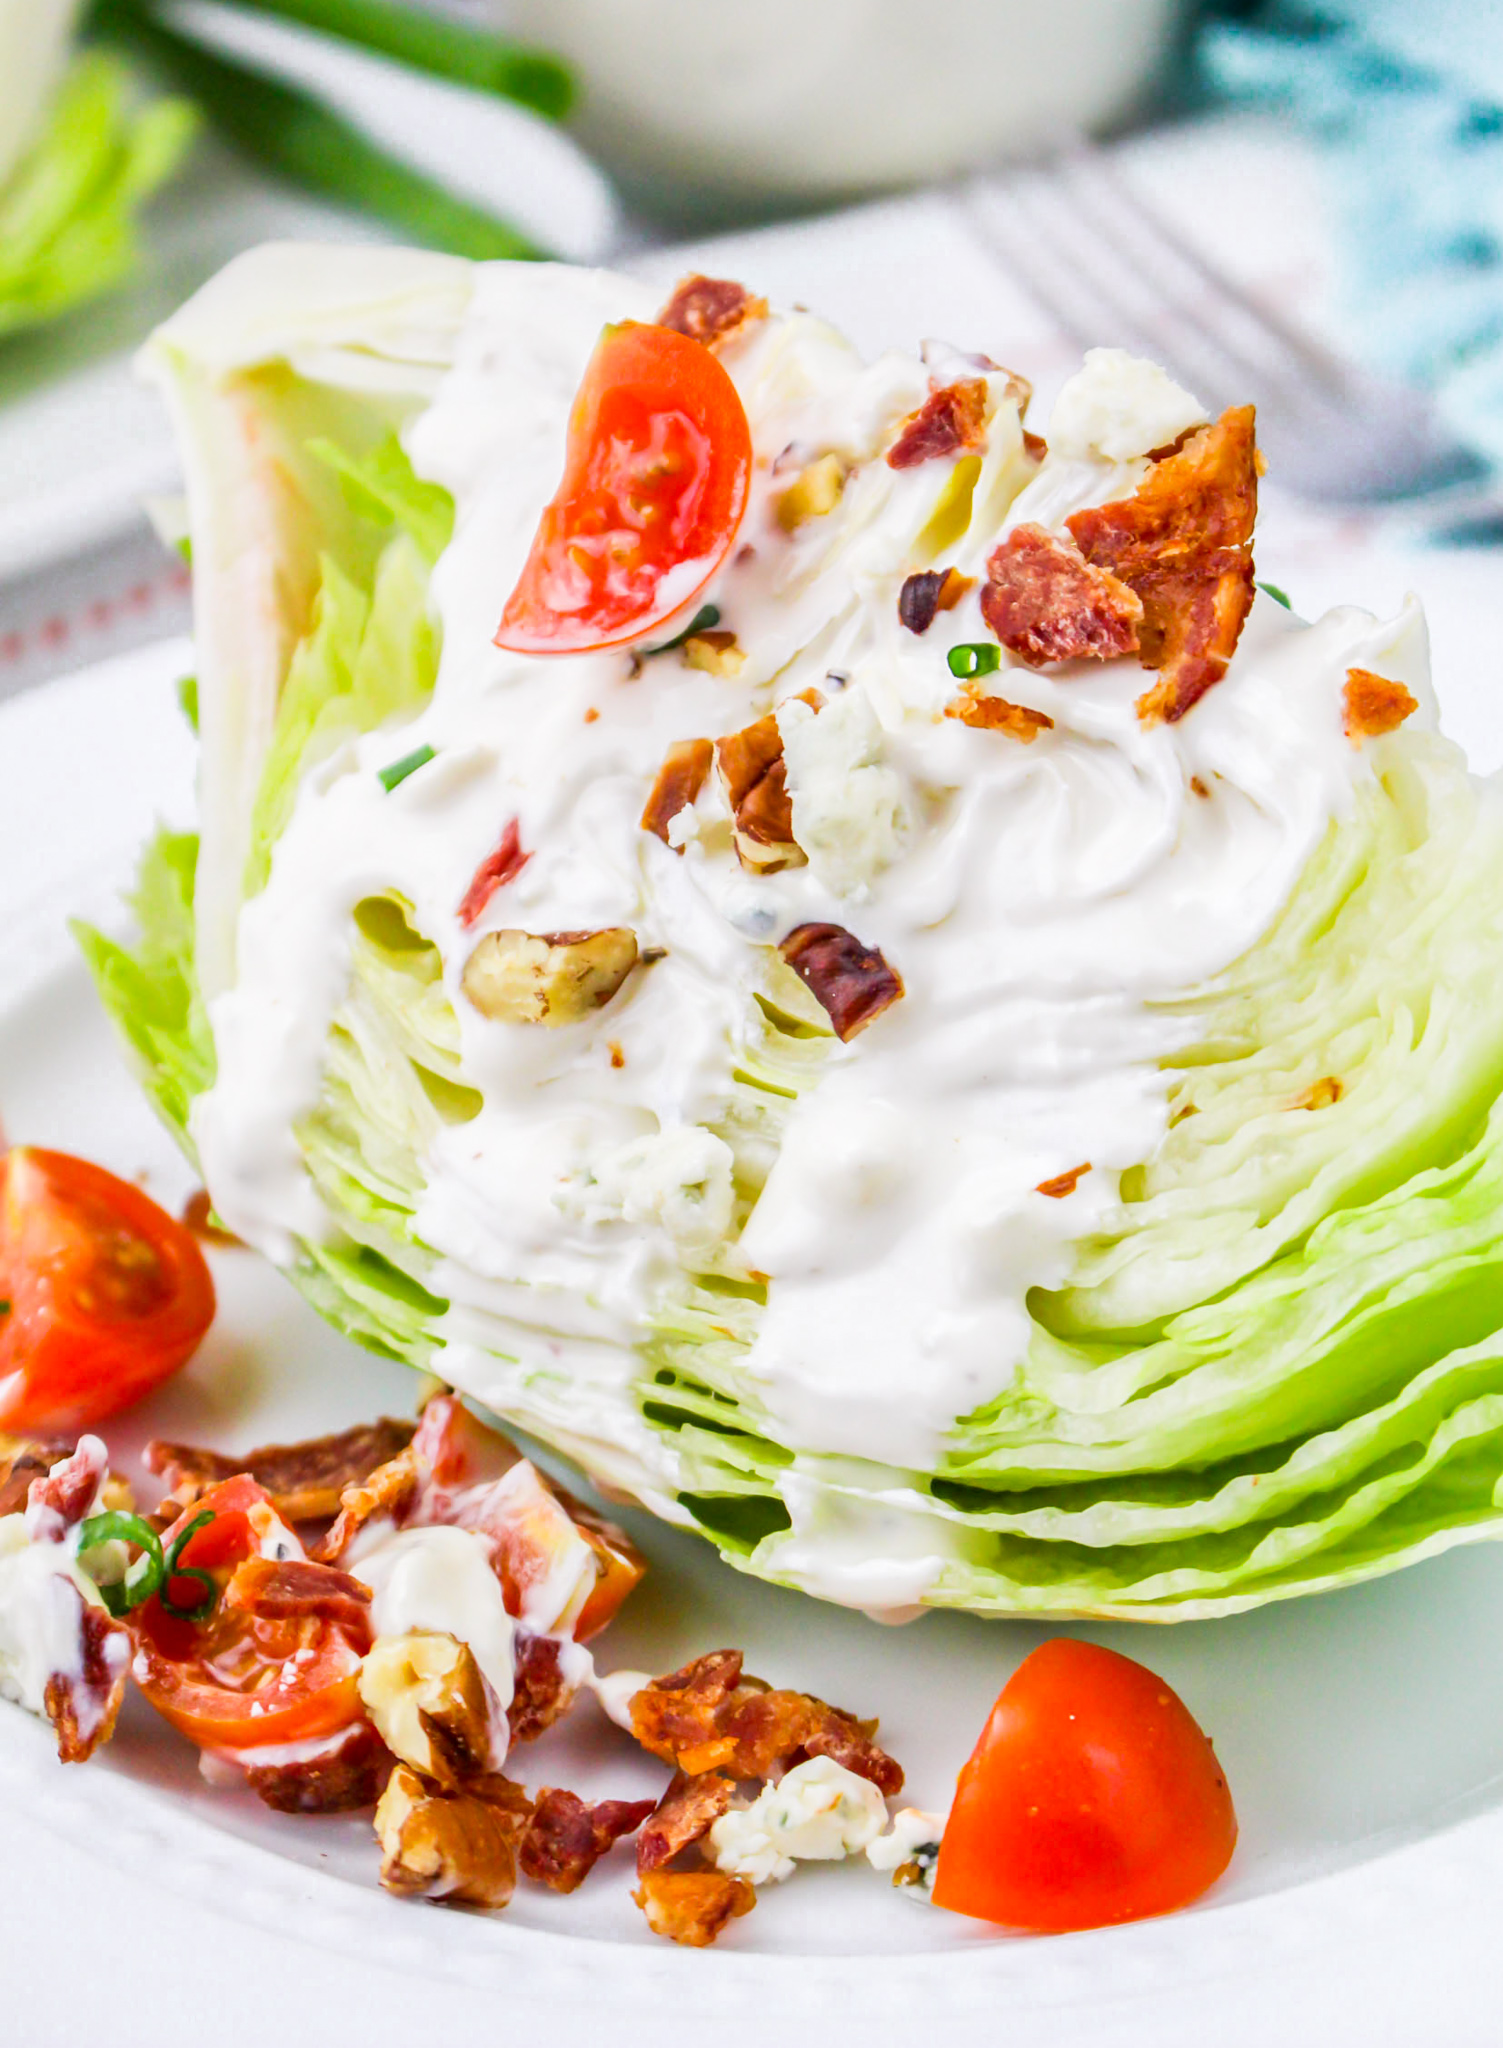 wedge of lettuce with dressing on plate